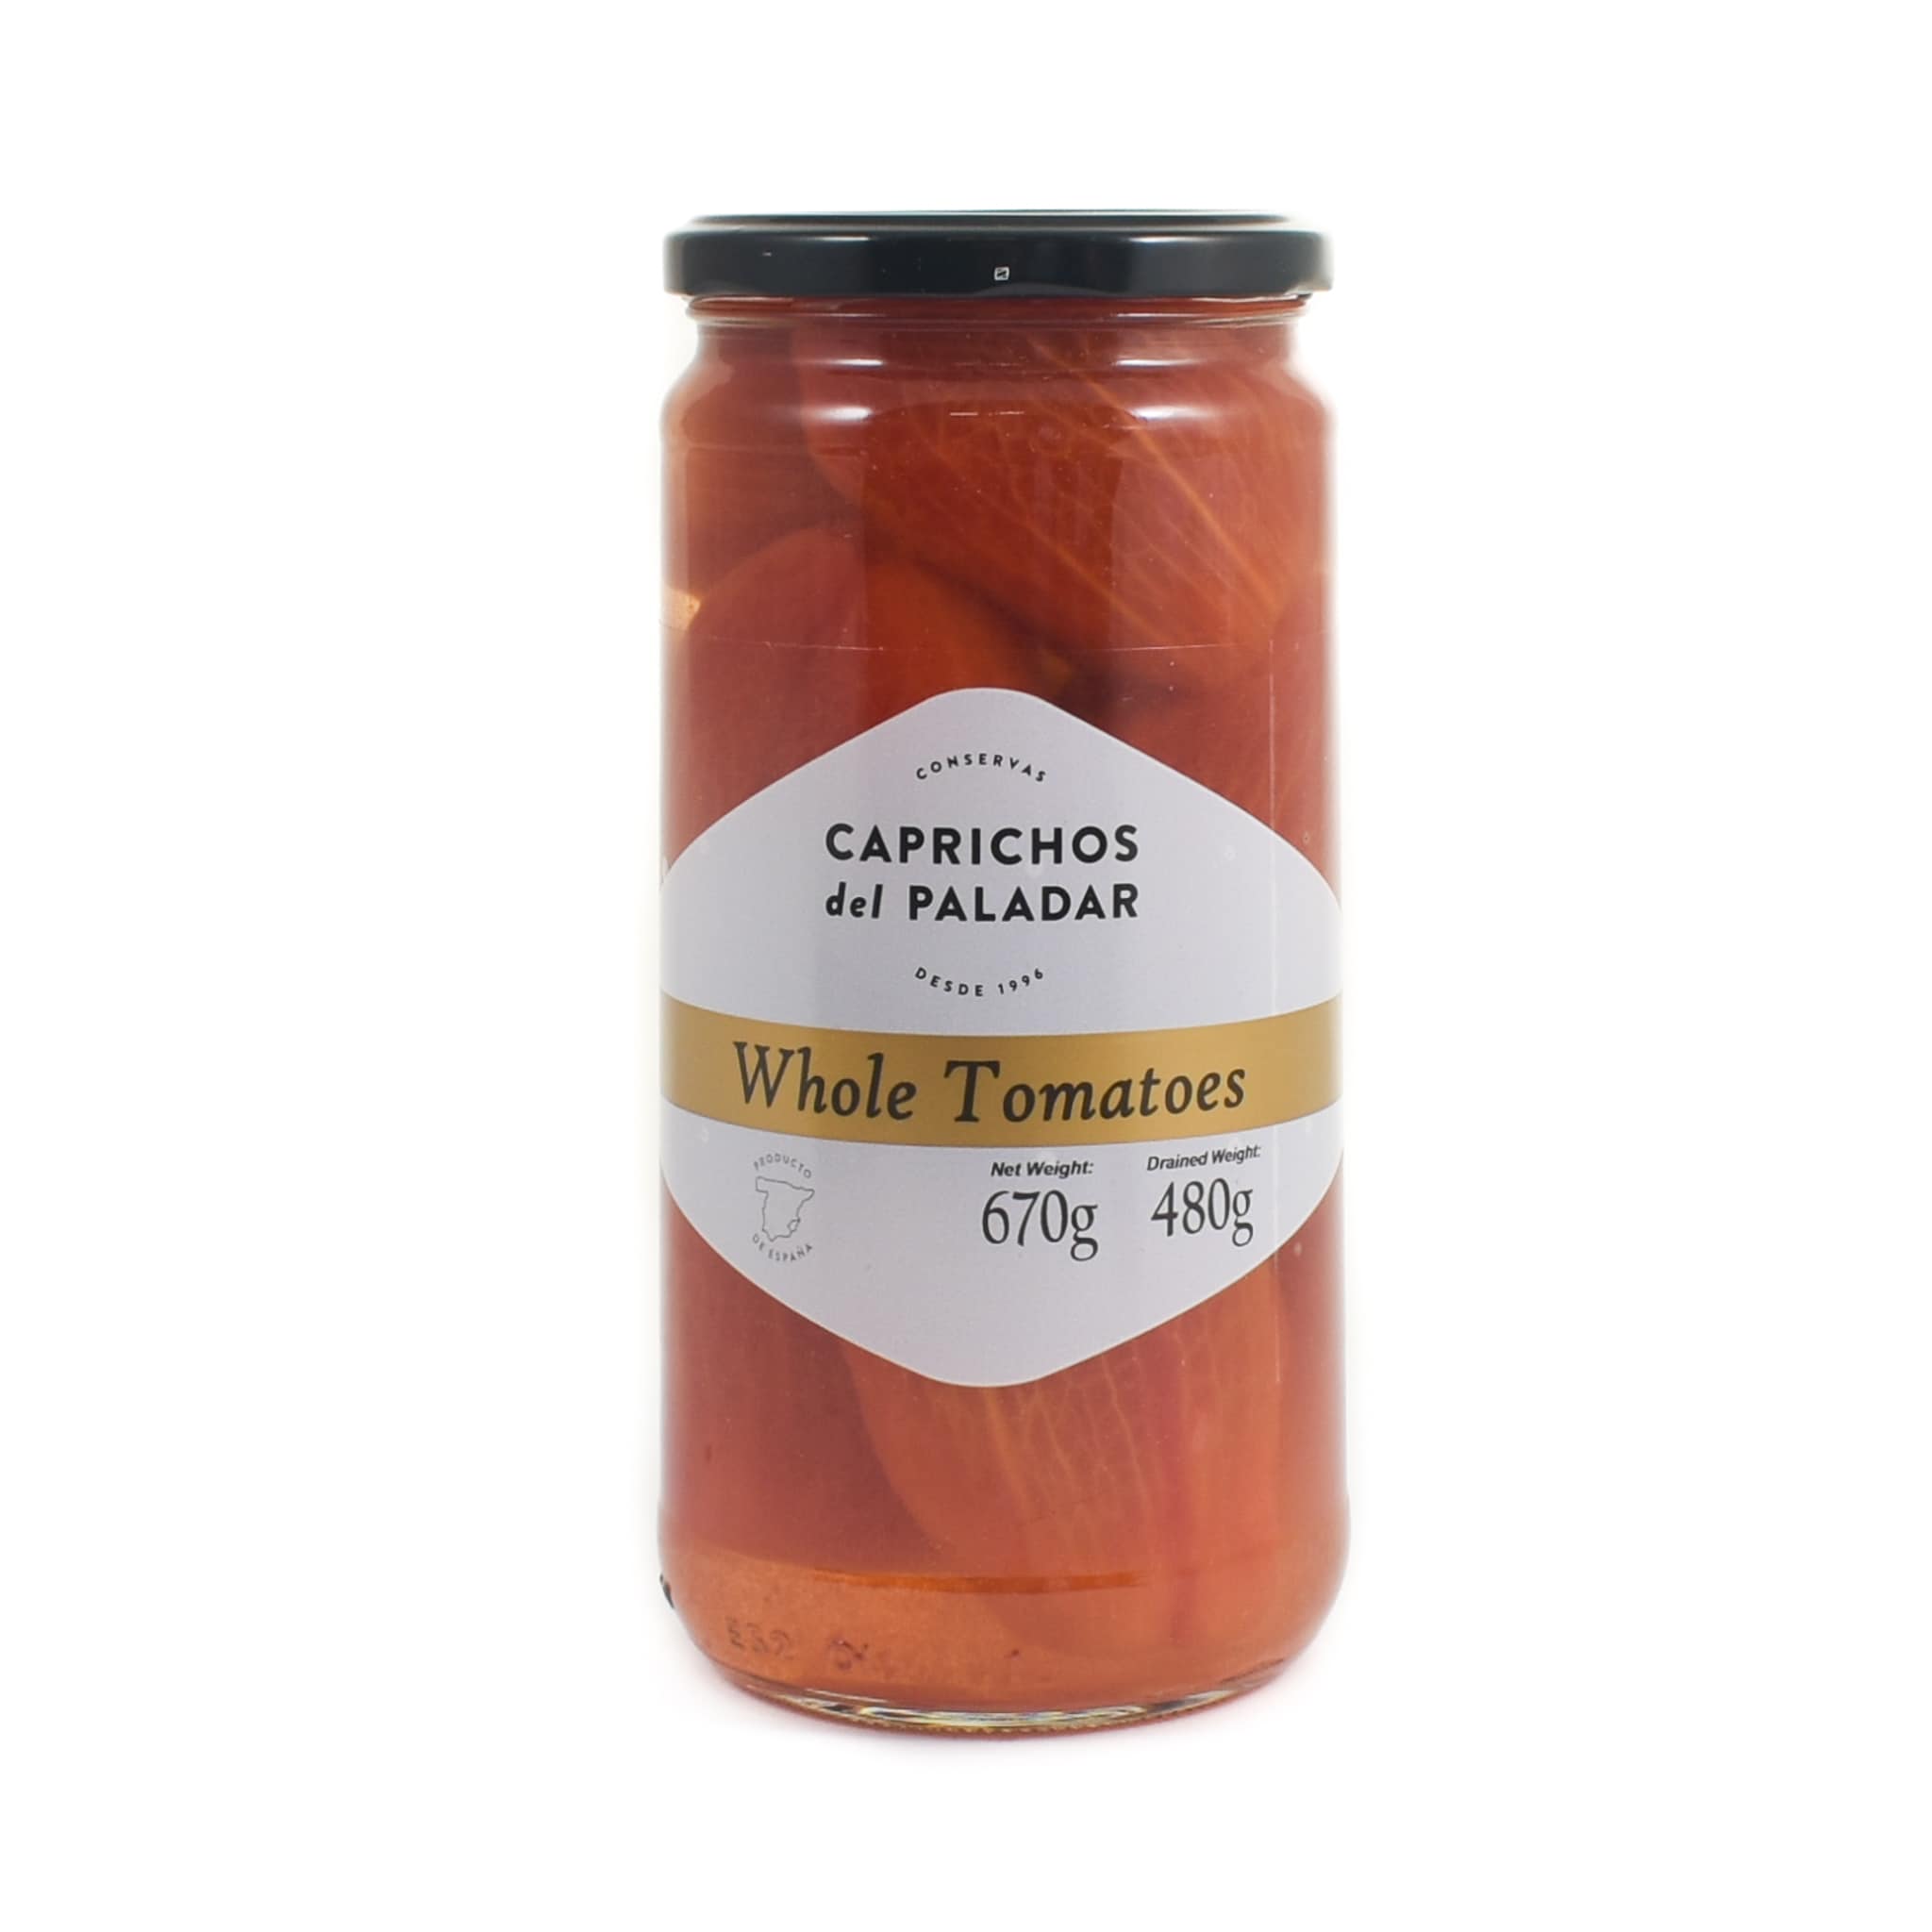 Caprichos del Paladar Whole Pera Tomatoes in Water, 670g